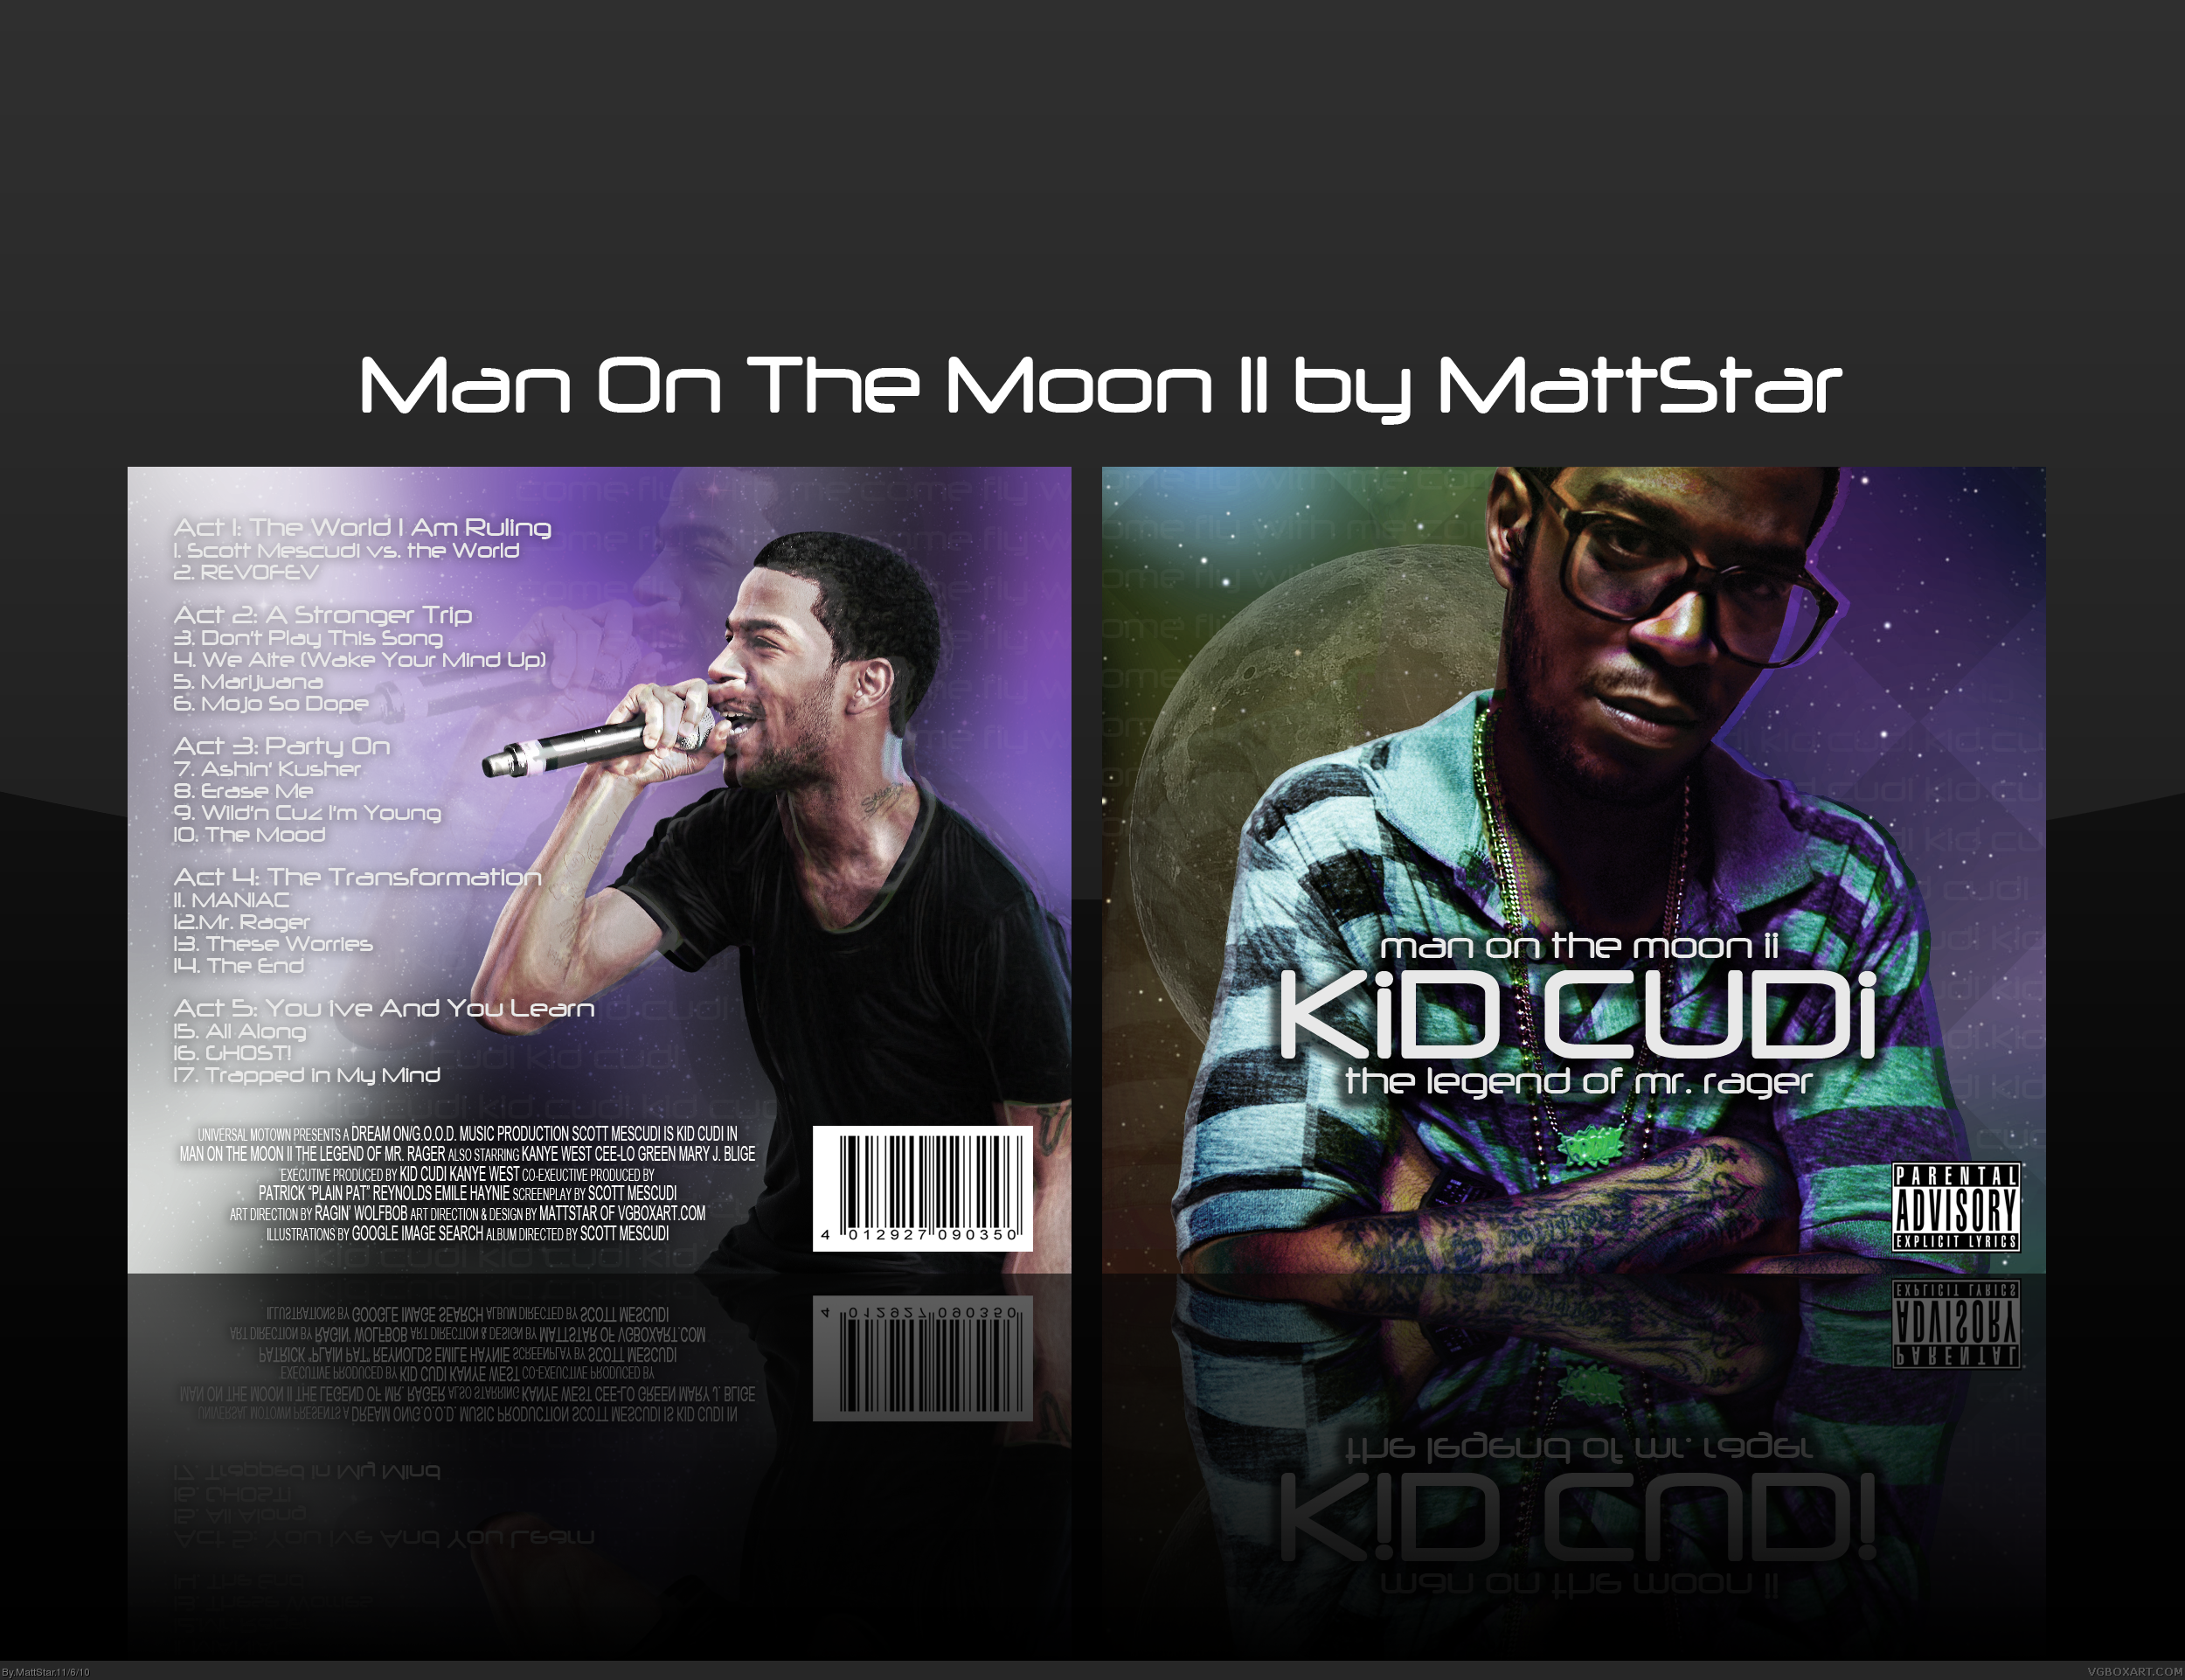 Kid Cudi Man On The Moon II The Legend of Mr Rager box cover